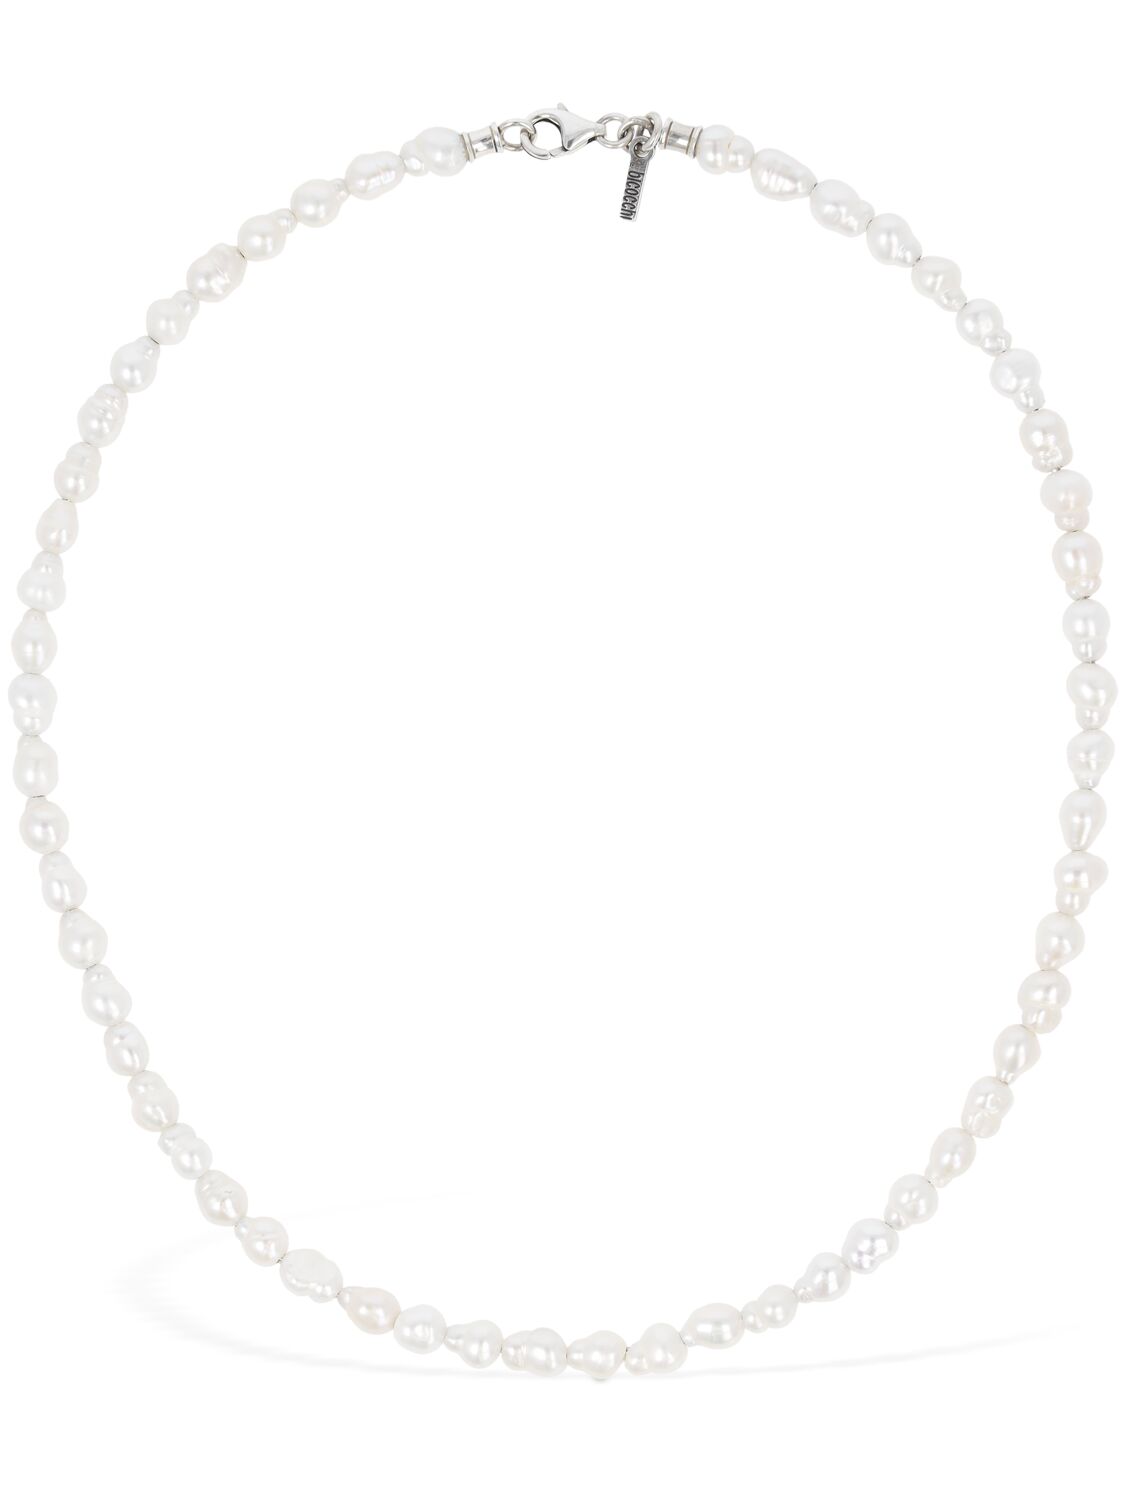 Image of Baroque Pearl Collar Necklace